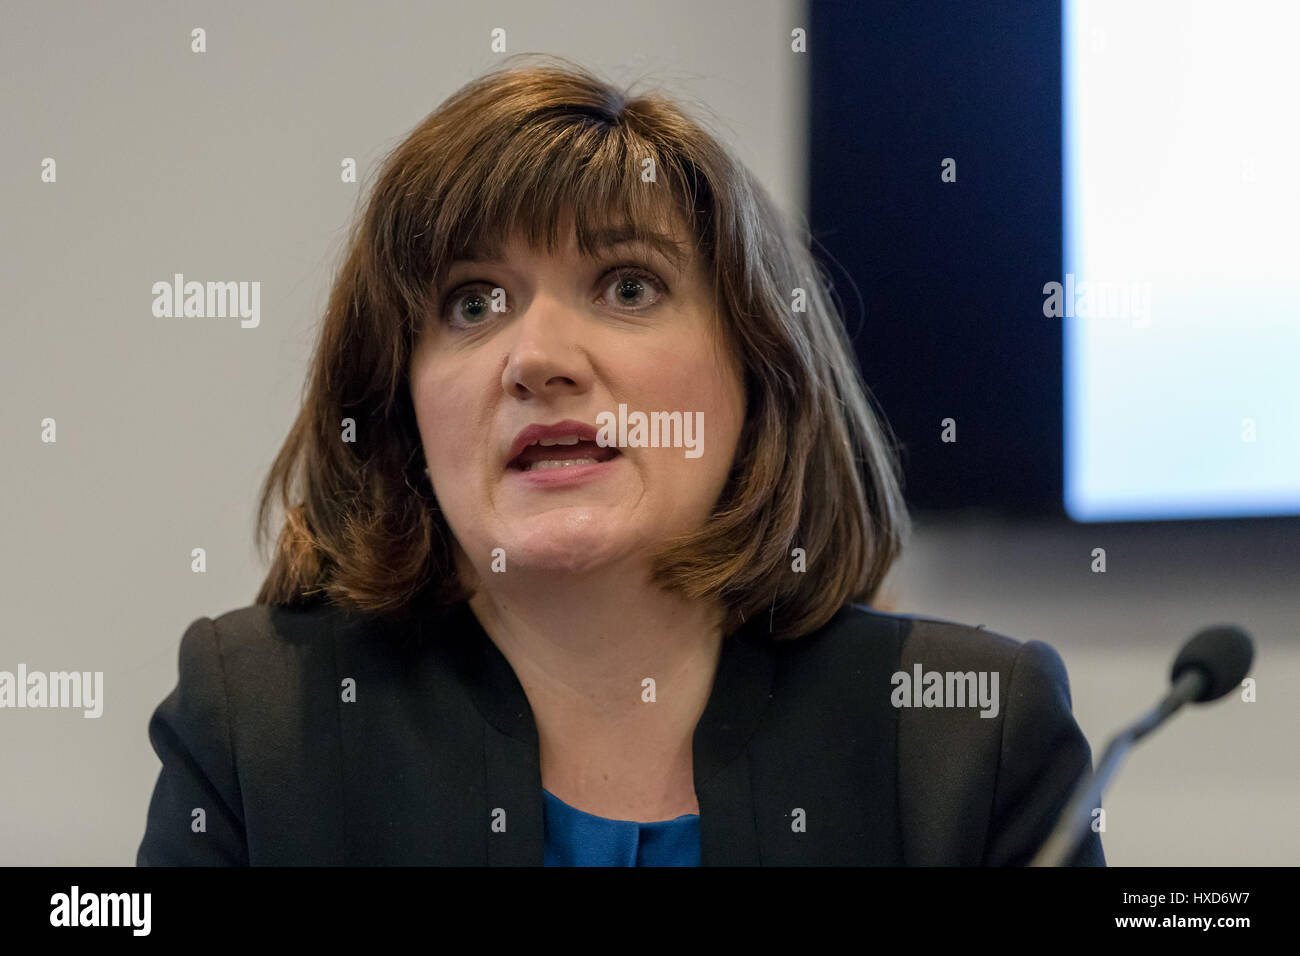 London, UK. 28th March 2017. Nicky Morgan speaking at the Open Britain press conference. Leading supporters of the Open Britain campaign, Nicky Morgan MP, Chris Leslie MP and Nick Clegg MP hosted a press conference in which they answered questions about the Open Britain campaign’s publication: The Government’s Brexit Contract with the British people. Credit: Vickie Flores/Alamy Live News Stock Photo